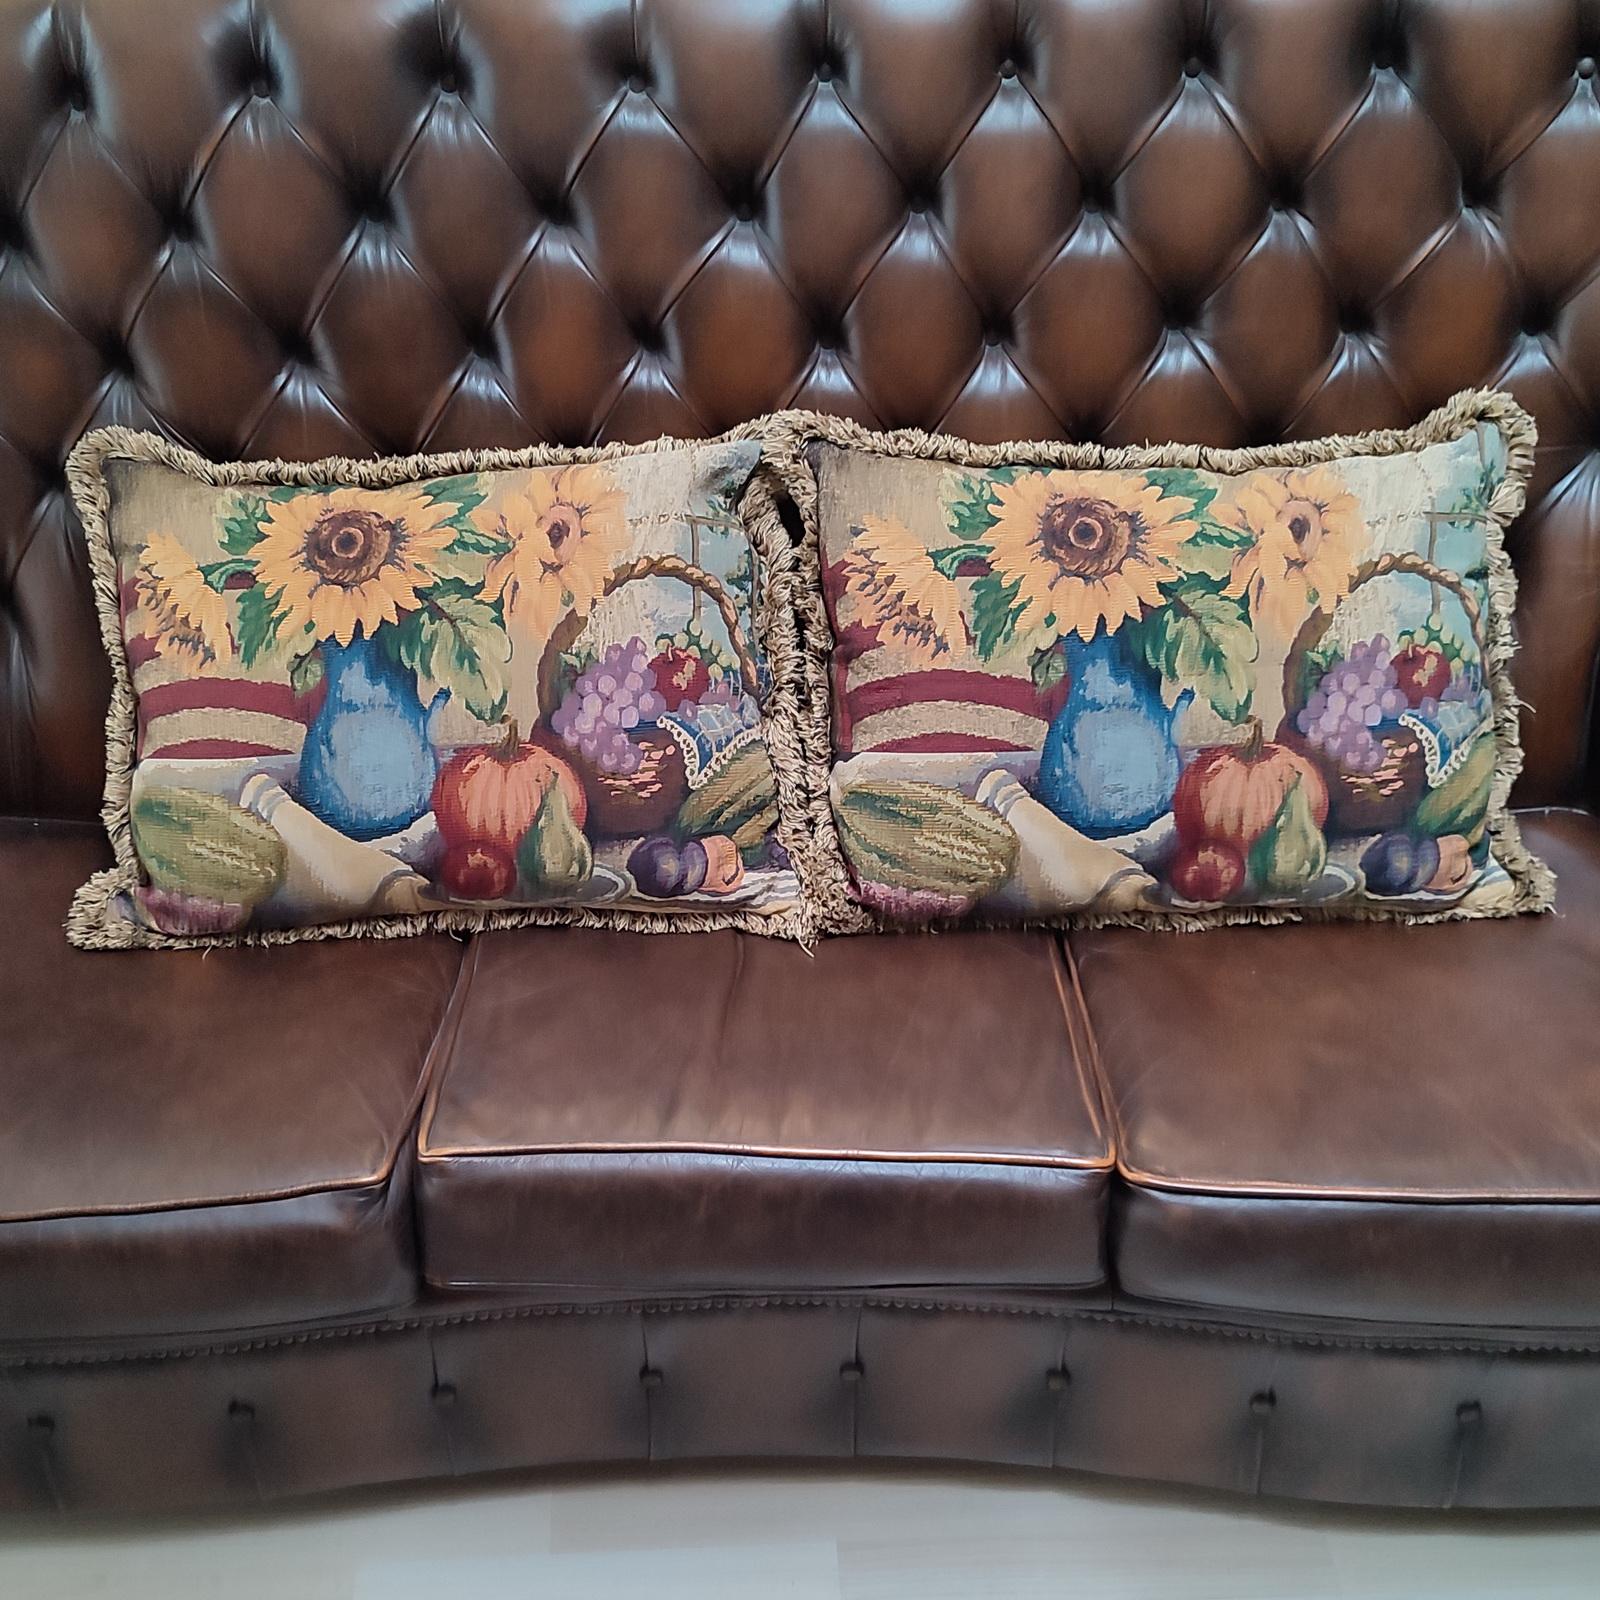 Van Gogh paintings style pair of vintage pillows made of Jacquard fabric with sun flower and basket fruits woven décor. Edge decorated with short tassels. Two pairs available. Backside made of dark brown wool. Very good used condition, some wear to